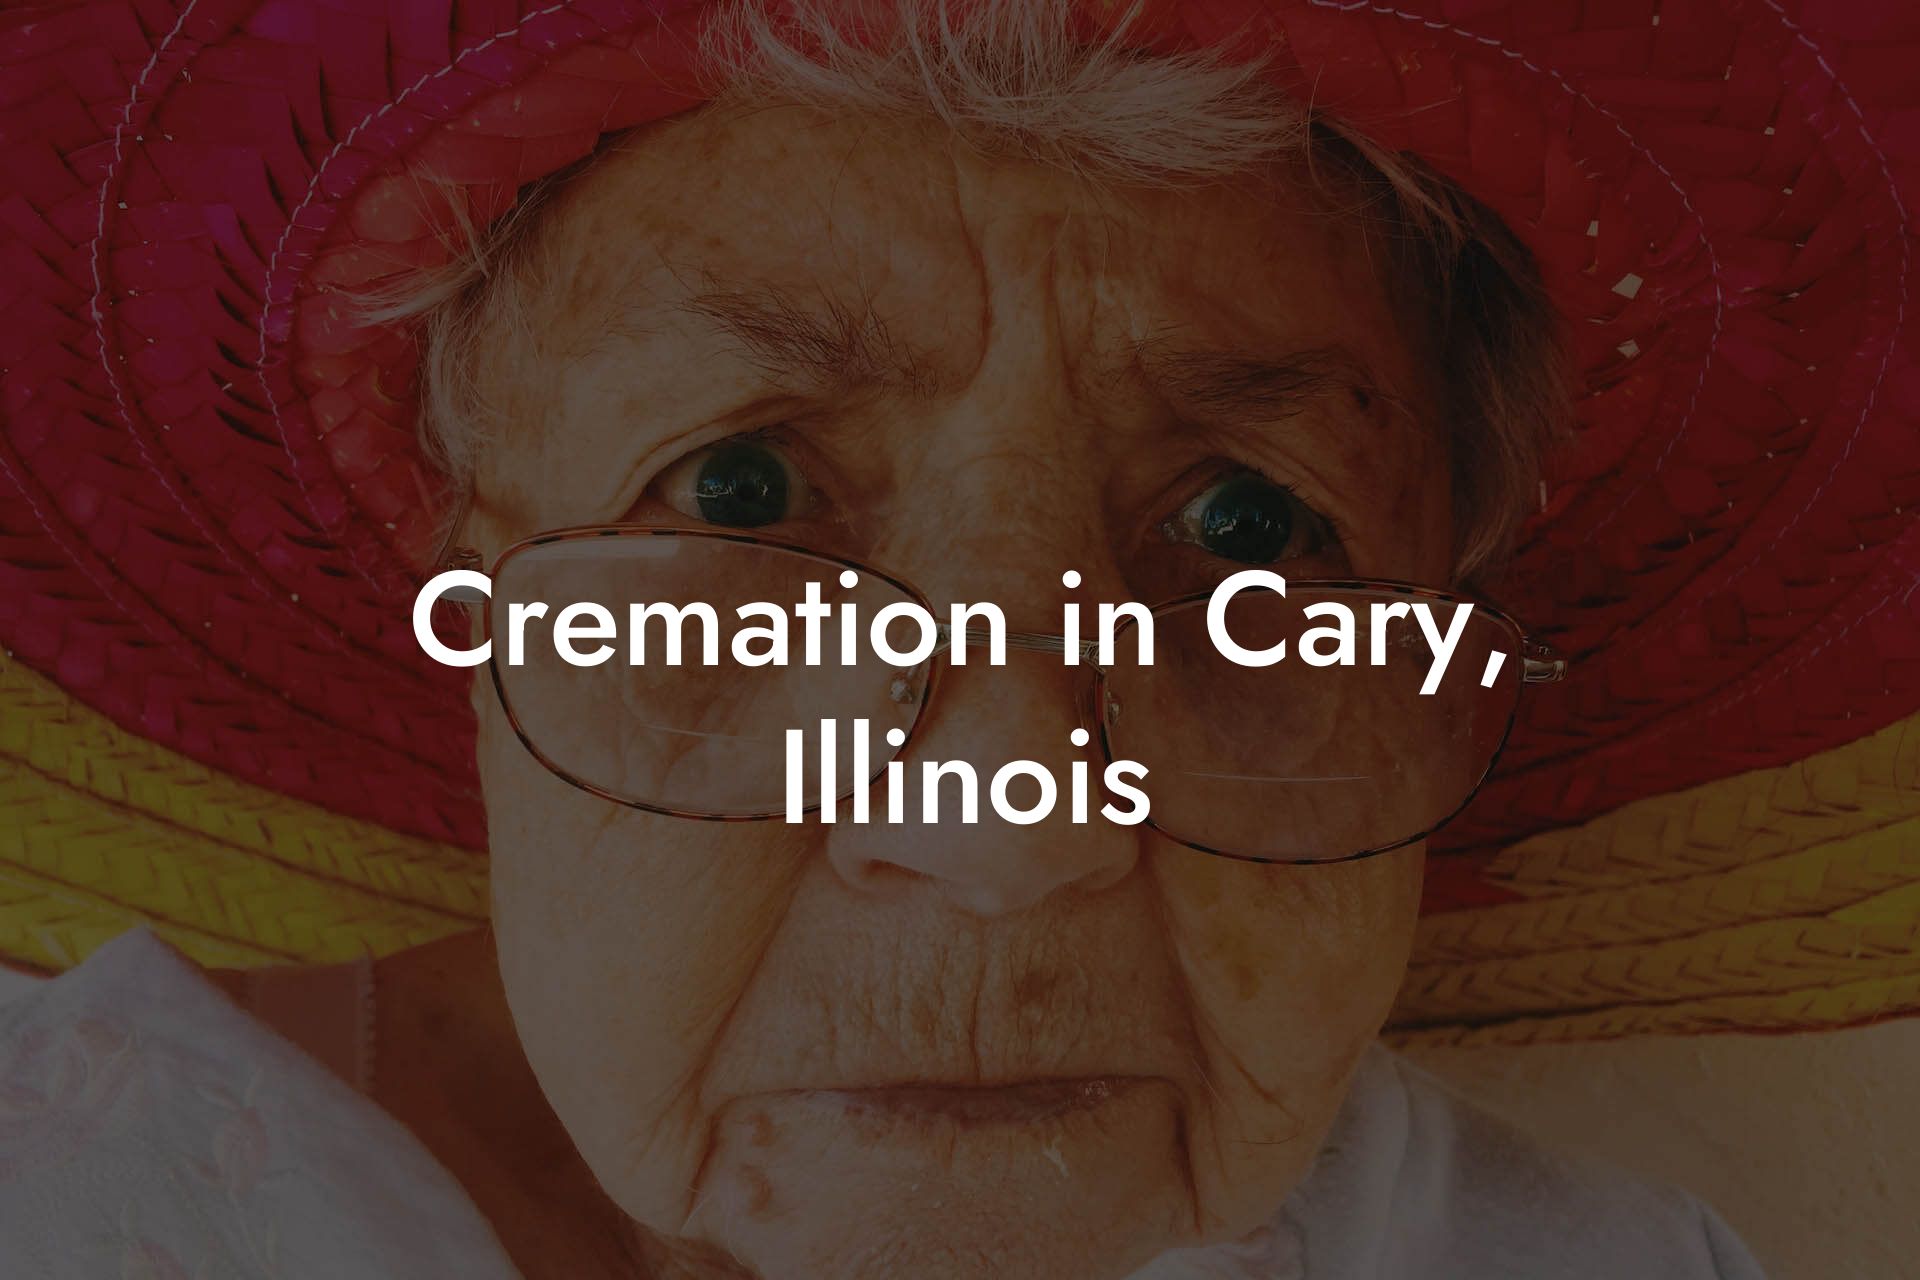 Cremation in Cary, Illinois